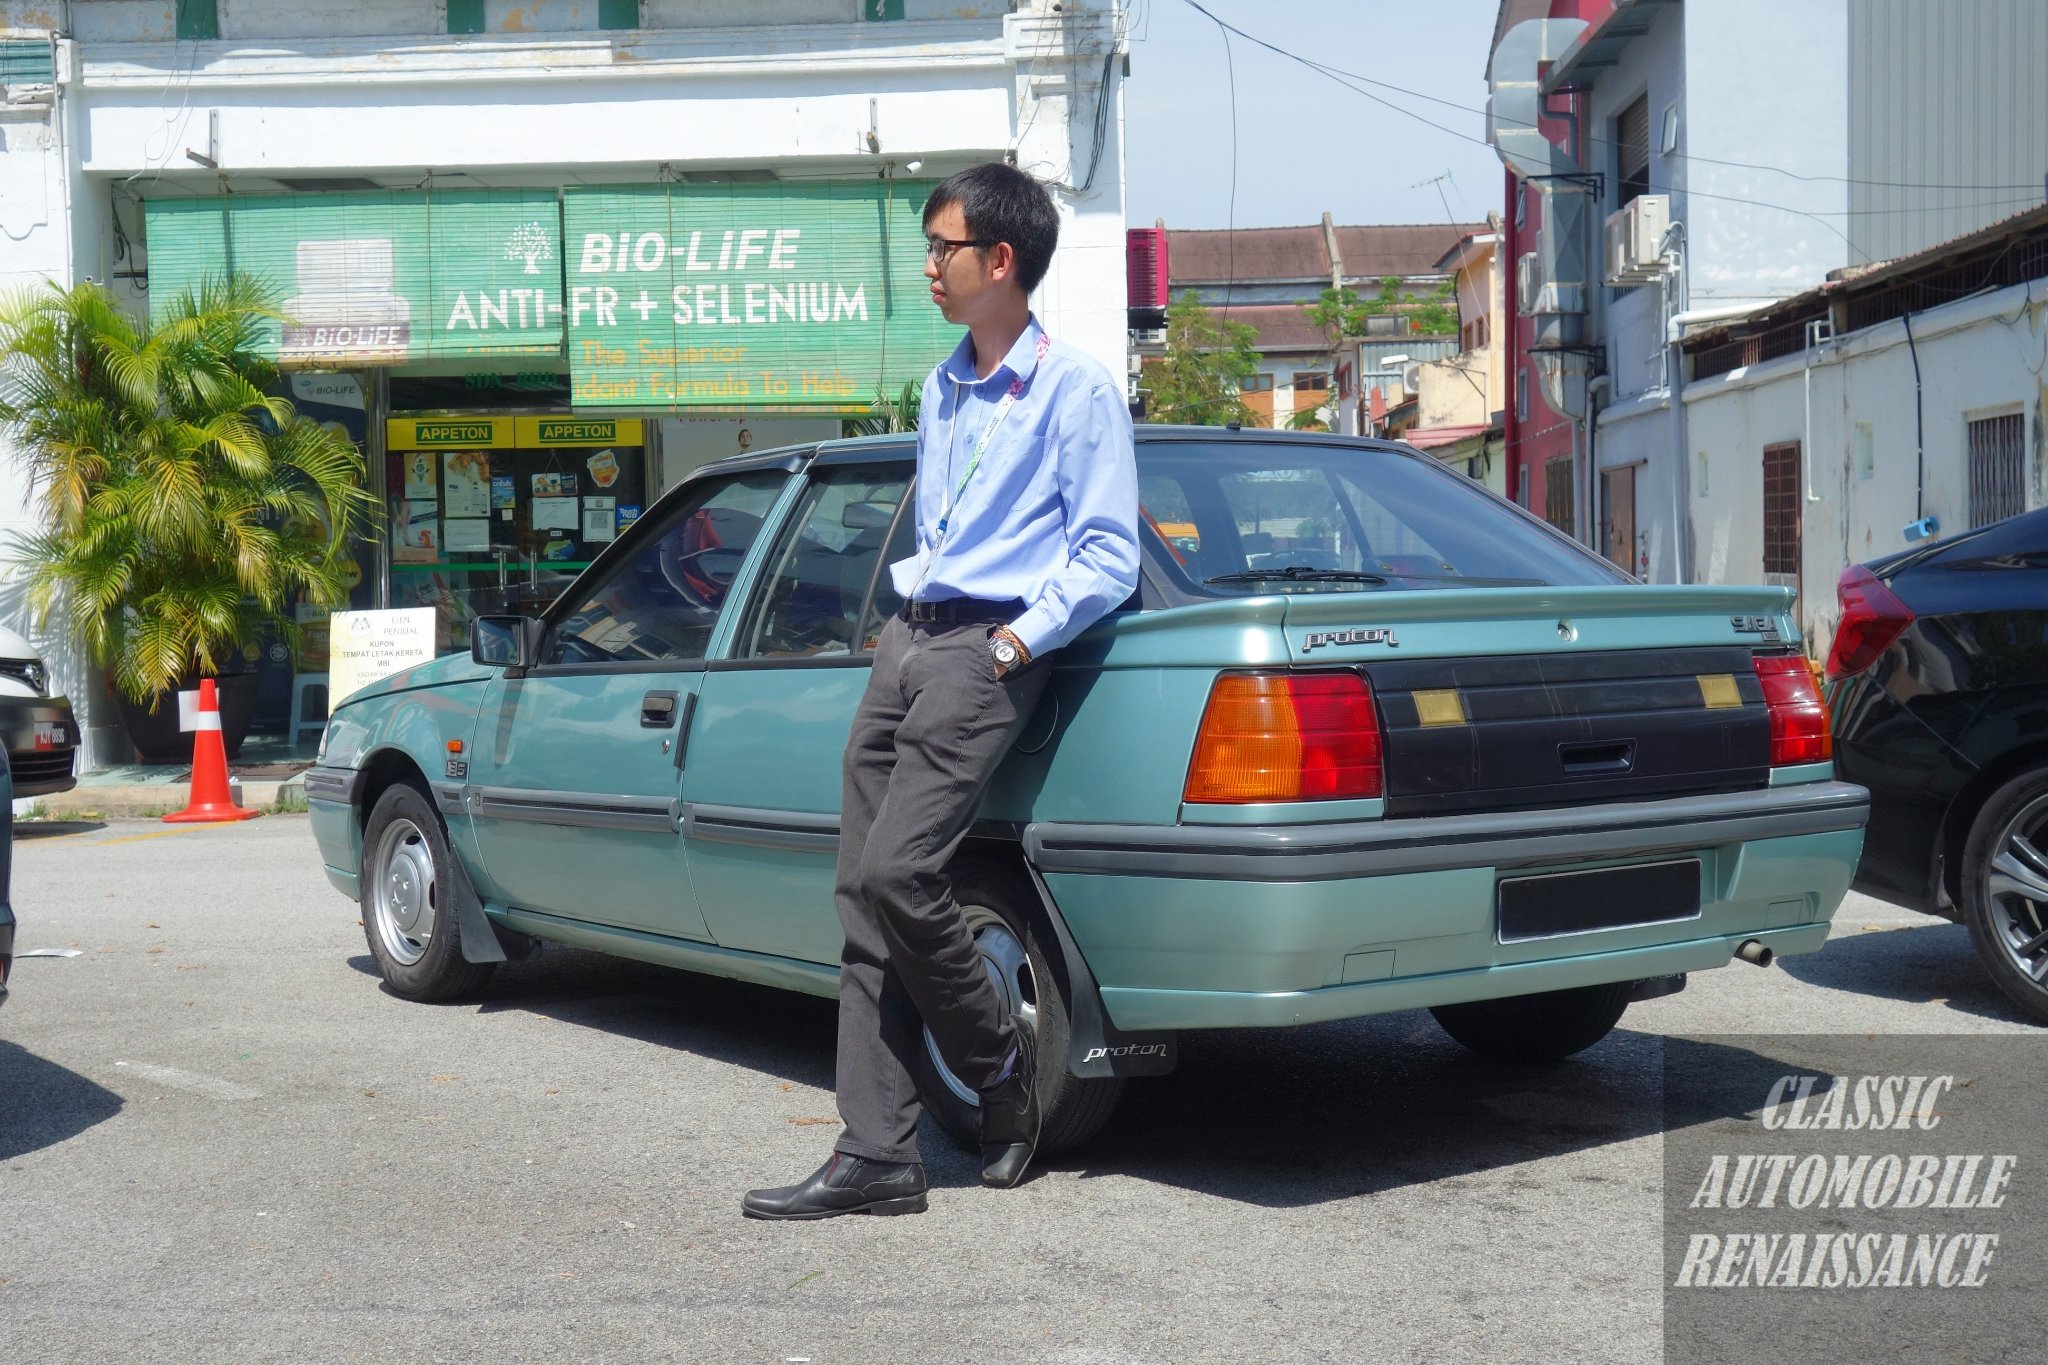 29-year-old Ken has shared the reasoning behind why he has decided to drive a 23-year-old Proton Saga. Image credit: Classic Automobile Renaissance